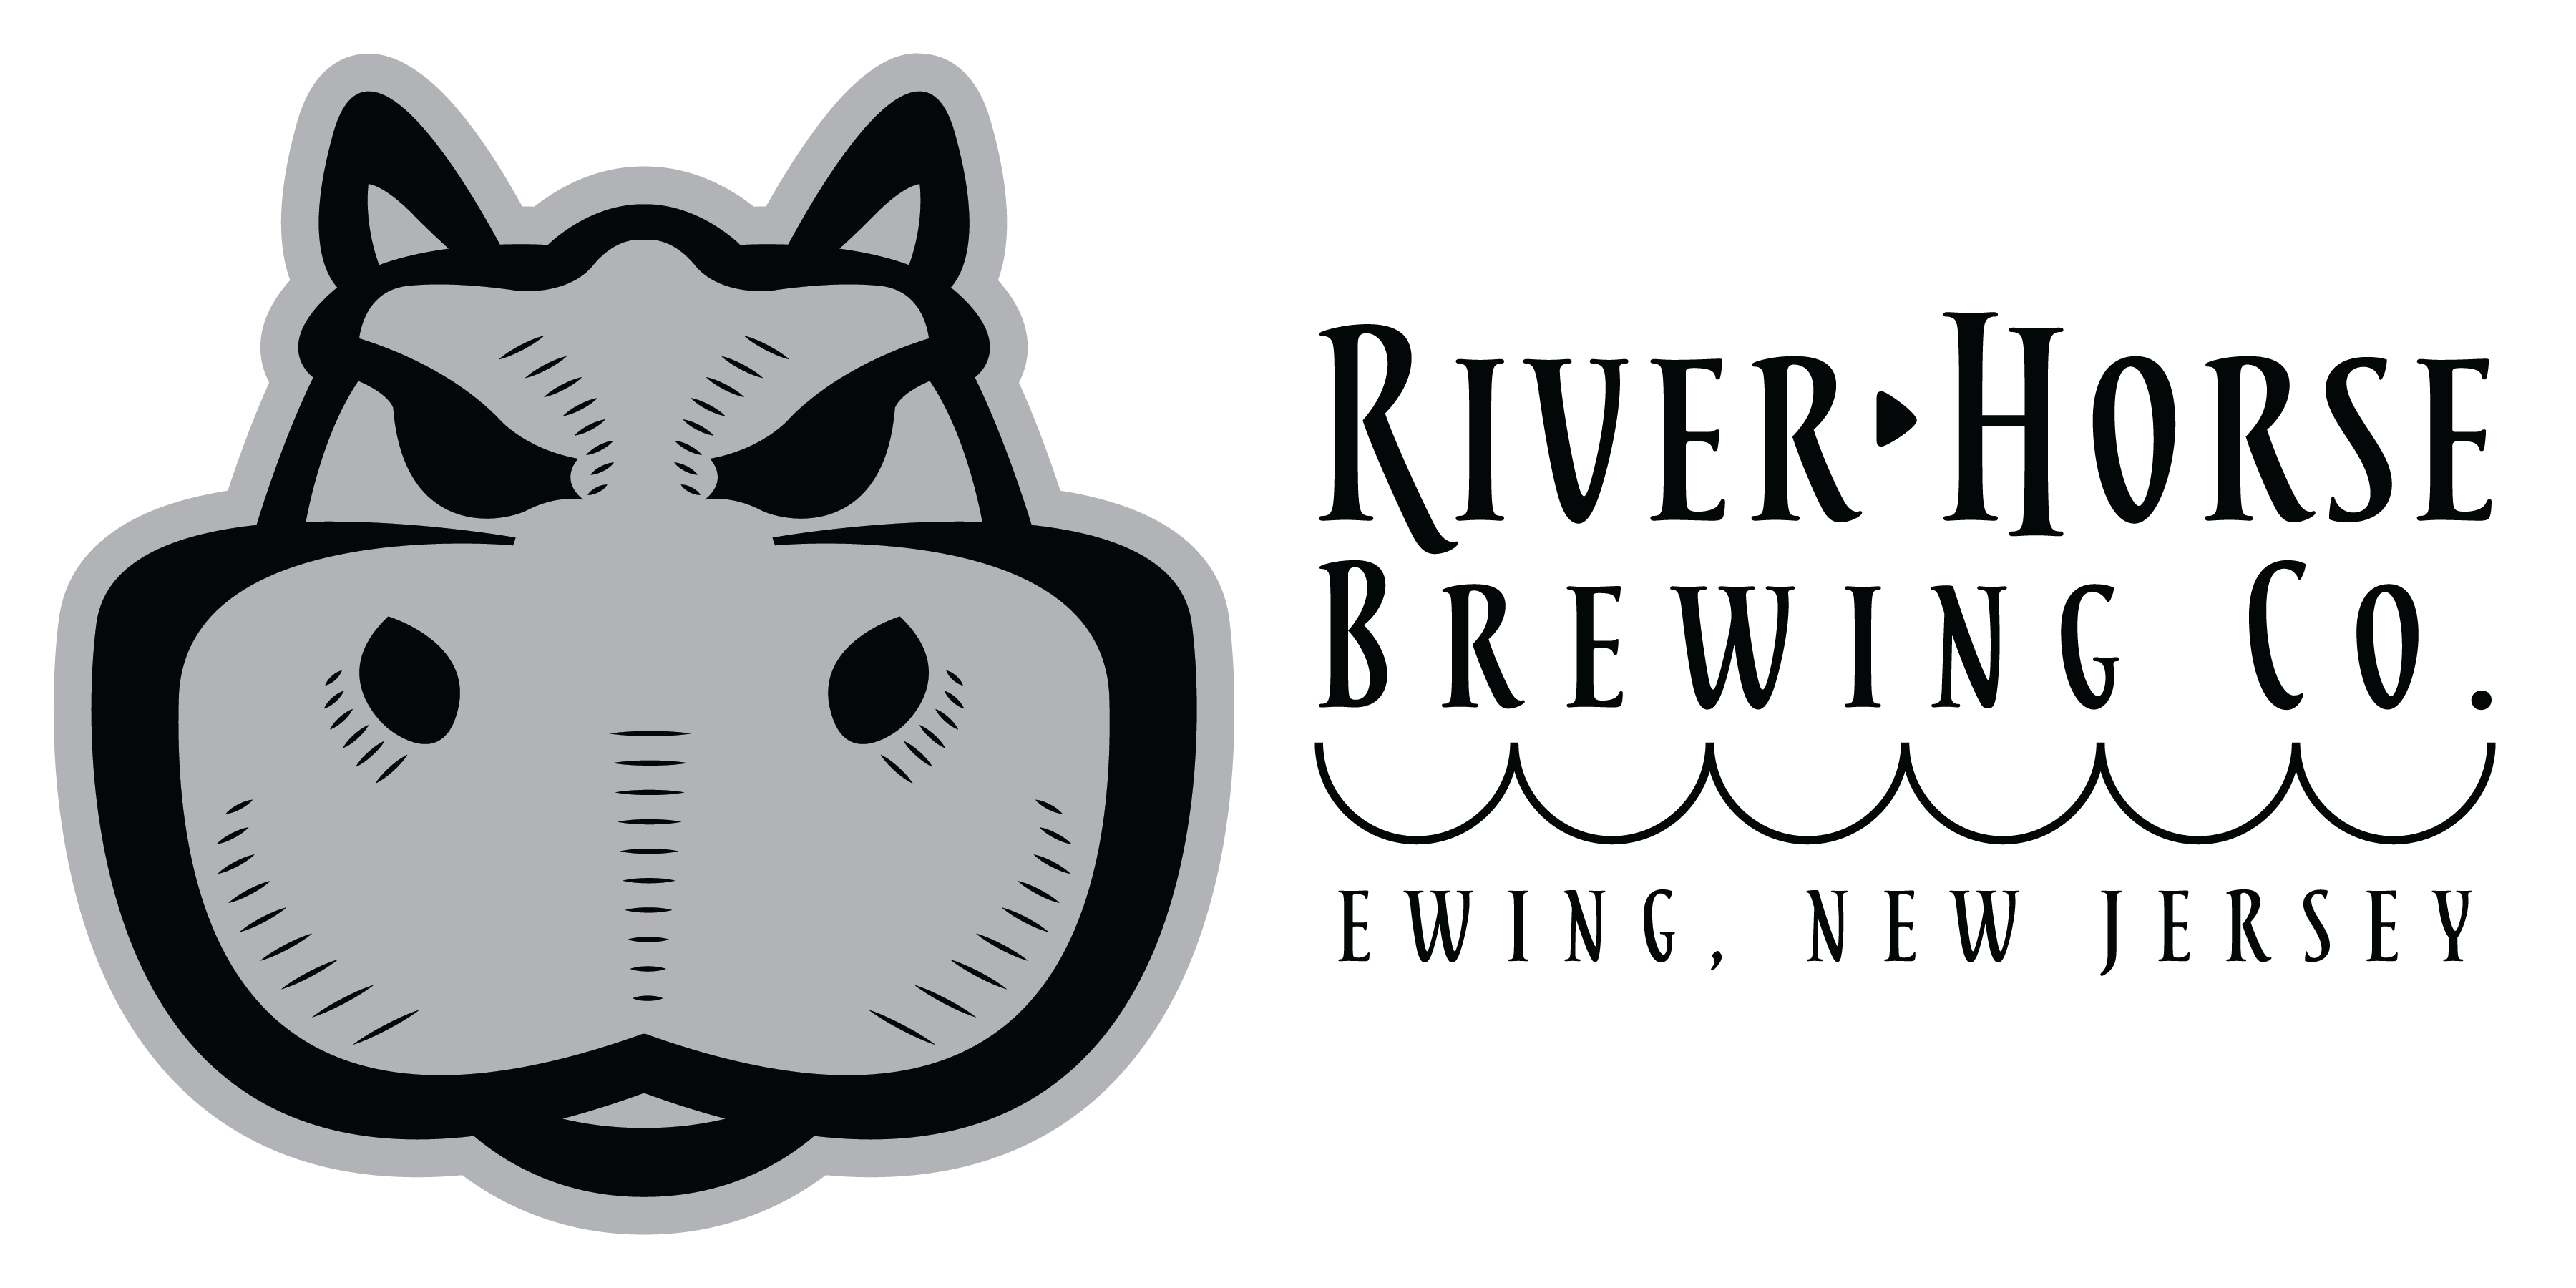 Text: River Horse Brewing Co., Ewing, New Jersey